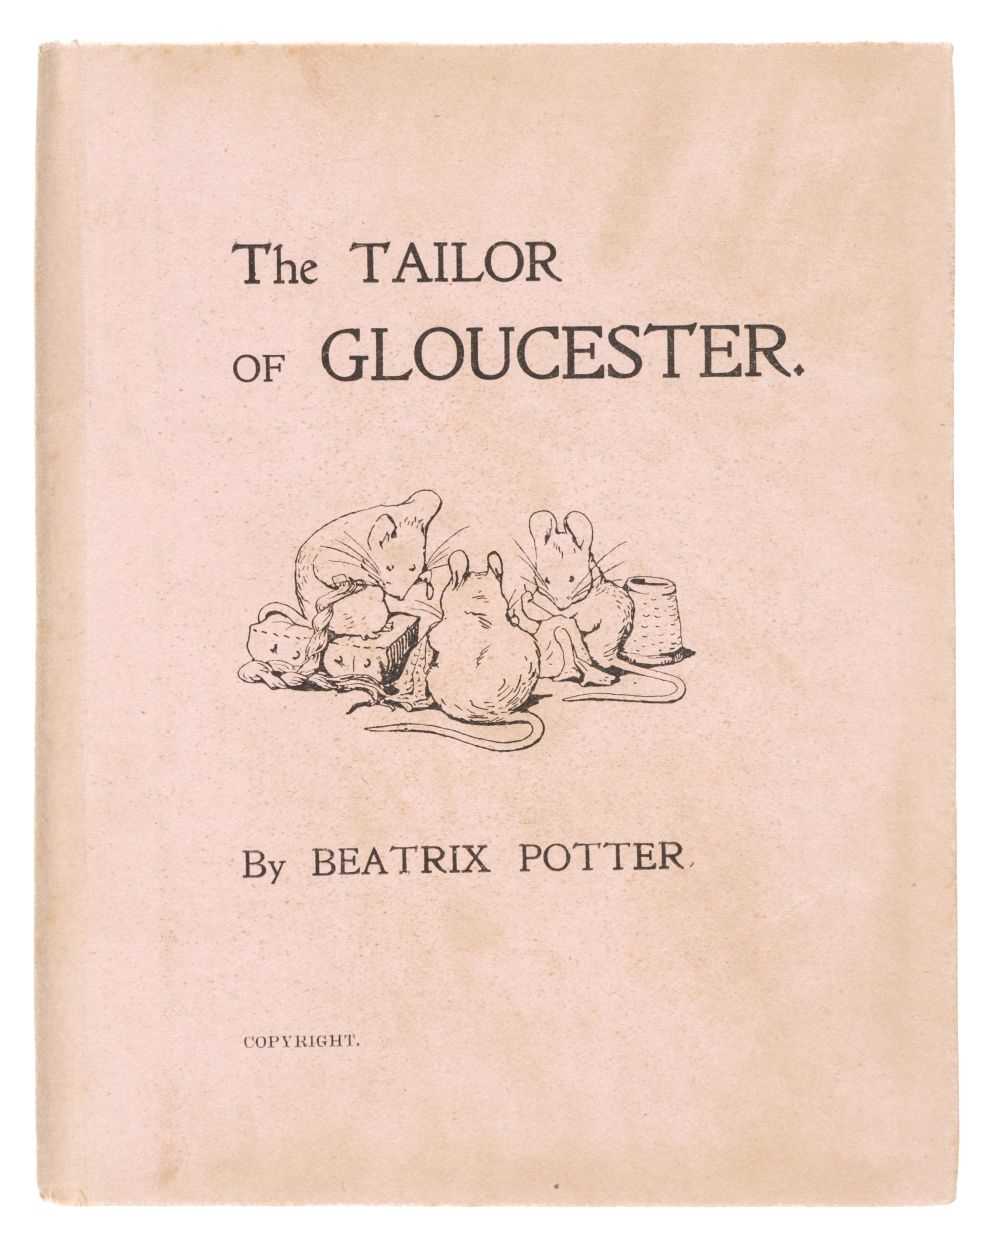 Lot 590 - Potter (Beatrix). The Tailor of Gloucester, 1st privately printed edition, [Strangeways], December 1902